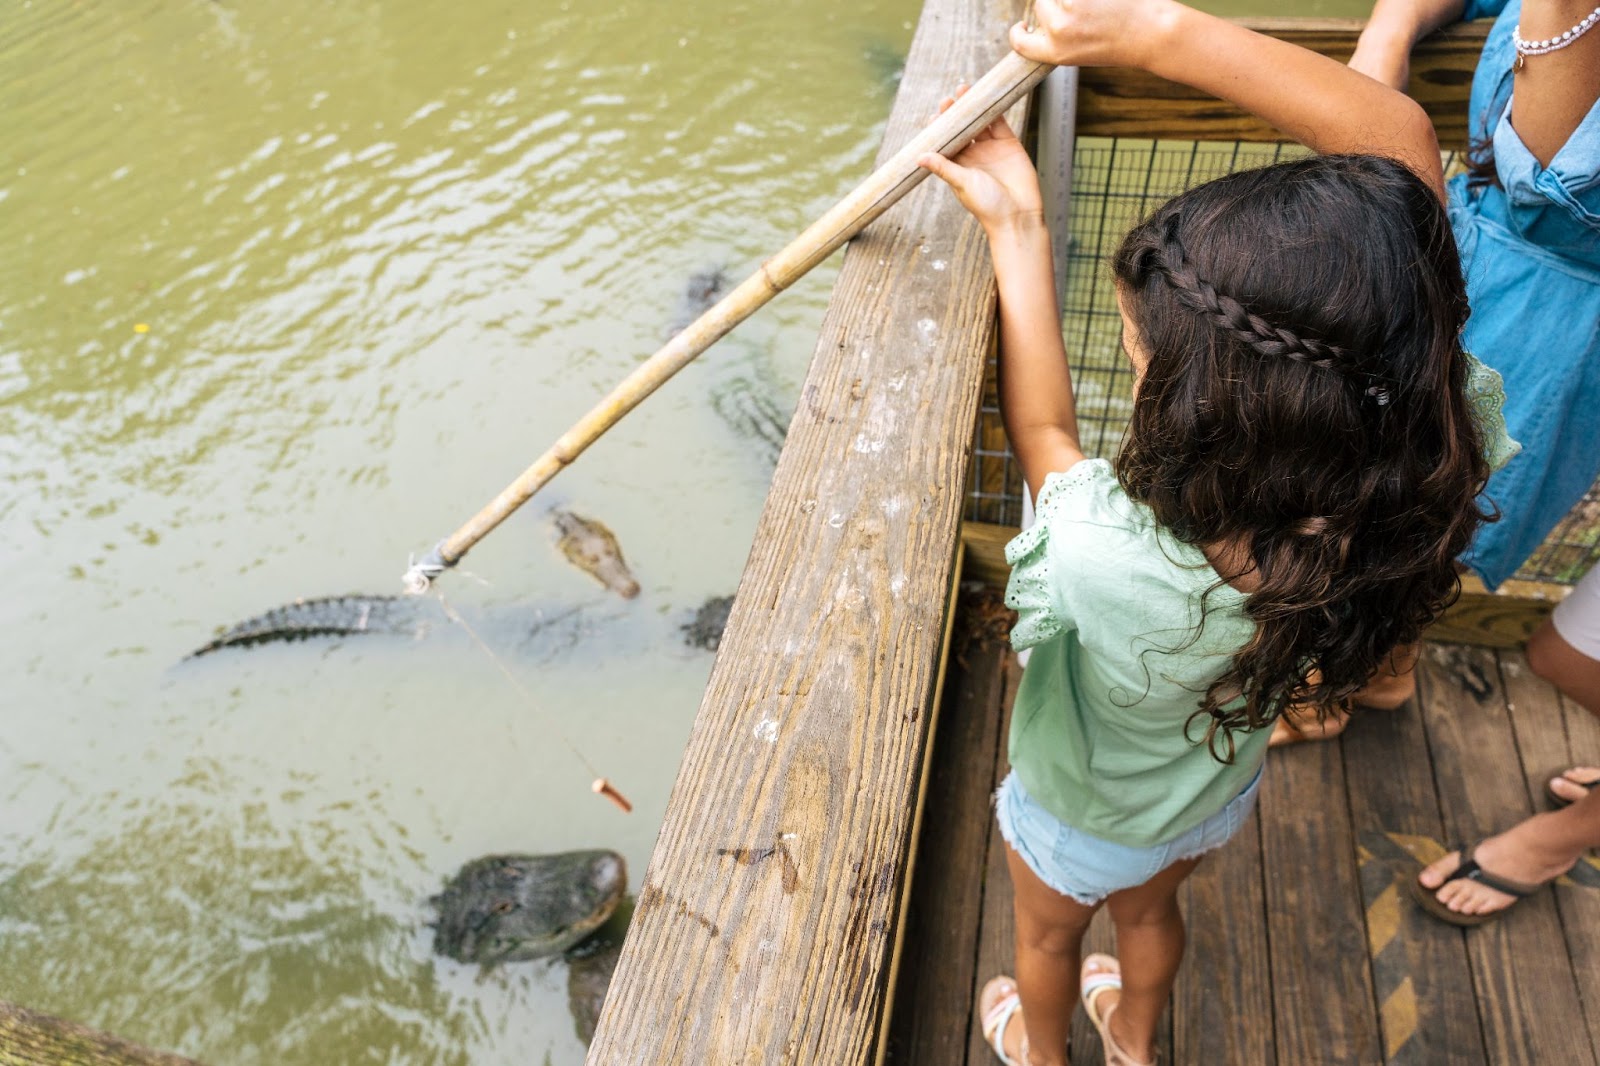 A family with young kids experience feeding alligators at Wild Florida